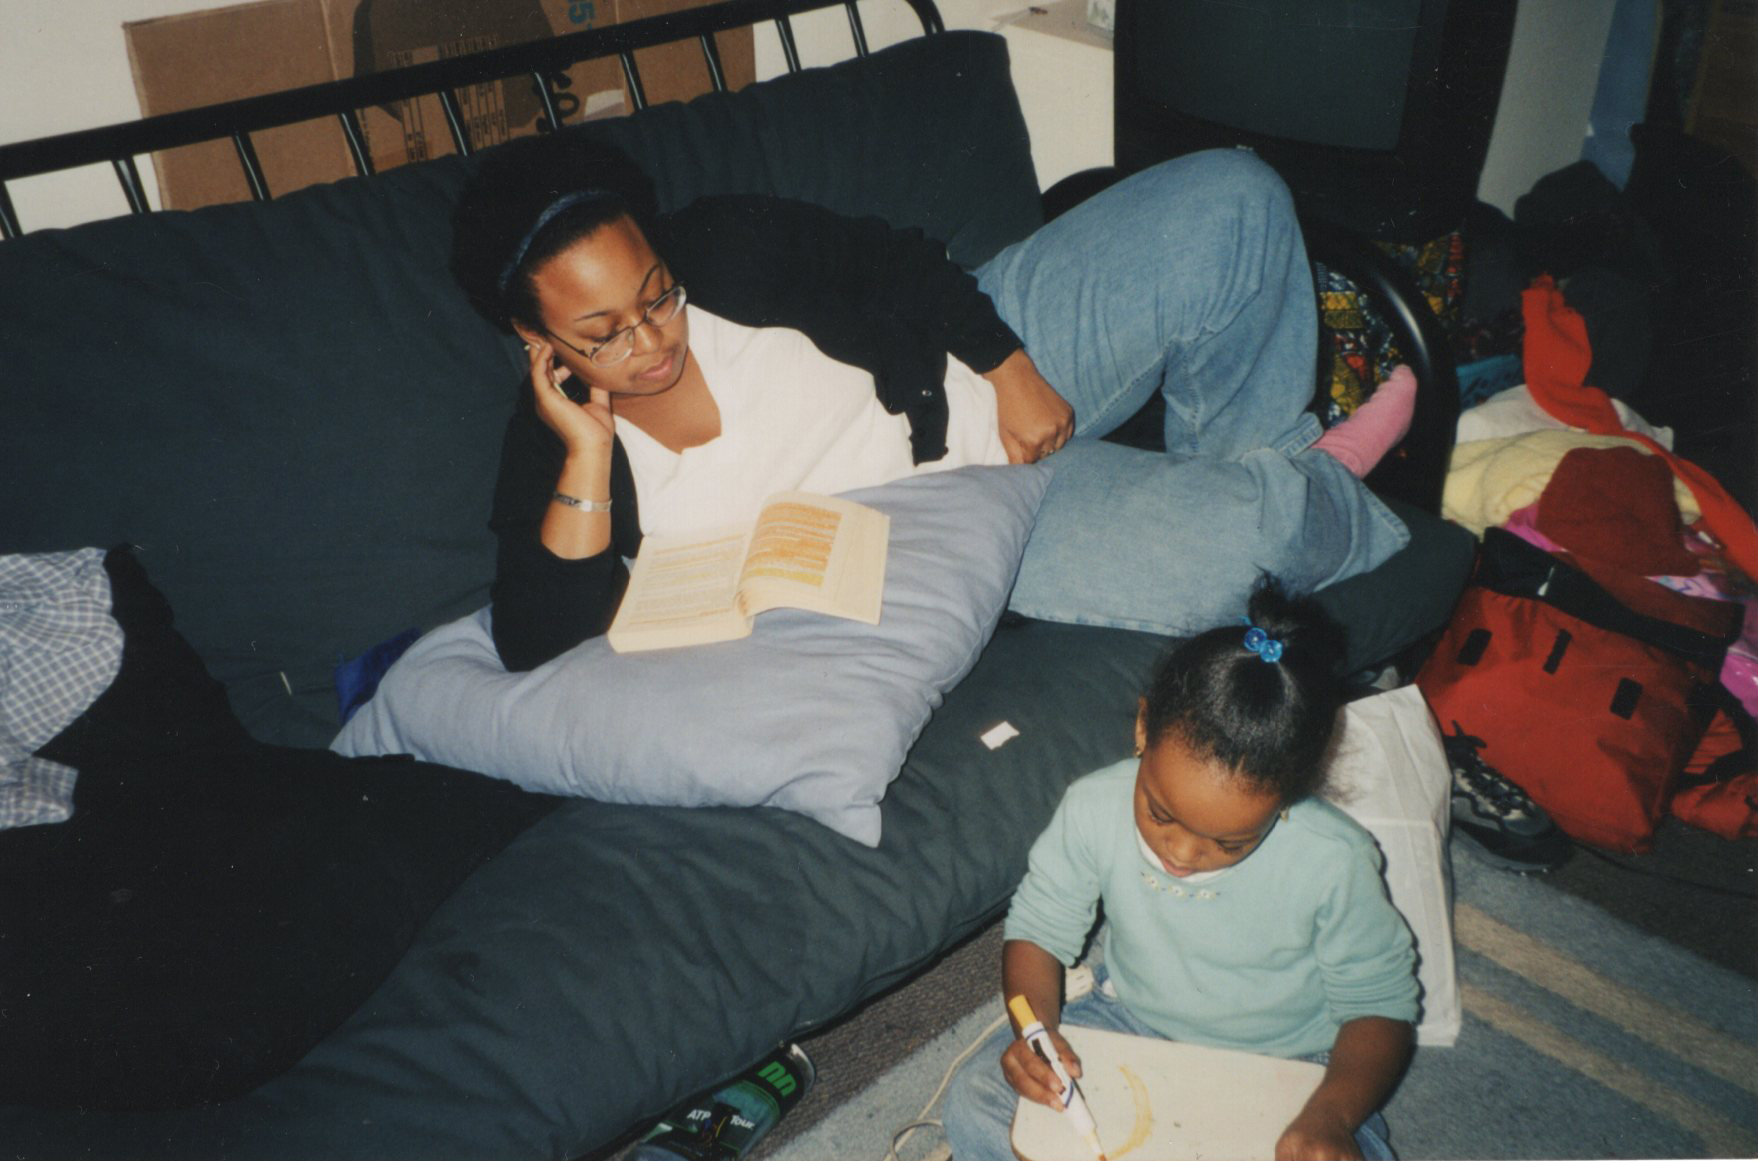 Christa studying with her daughter, Nikierra.